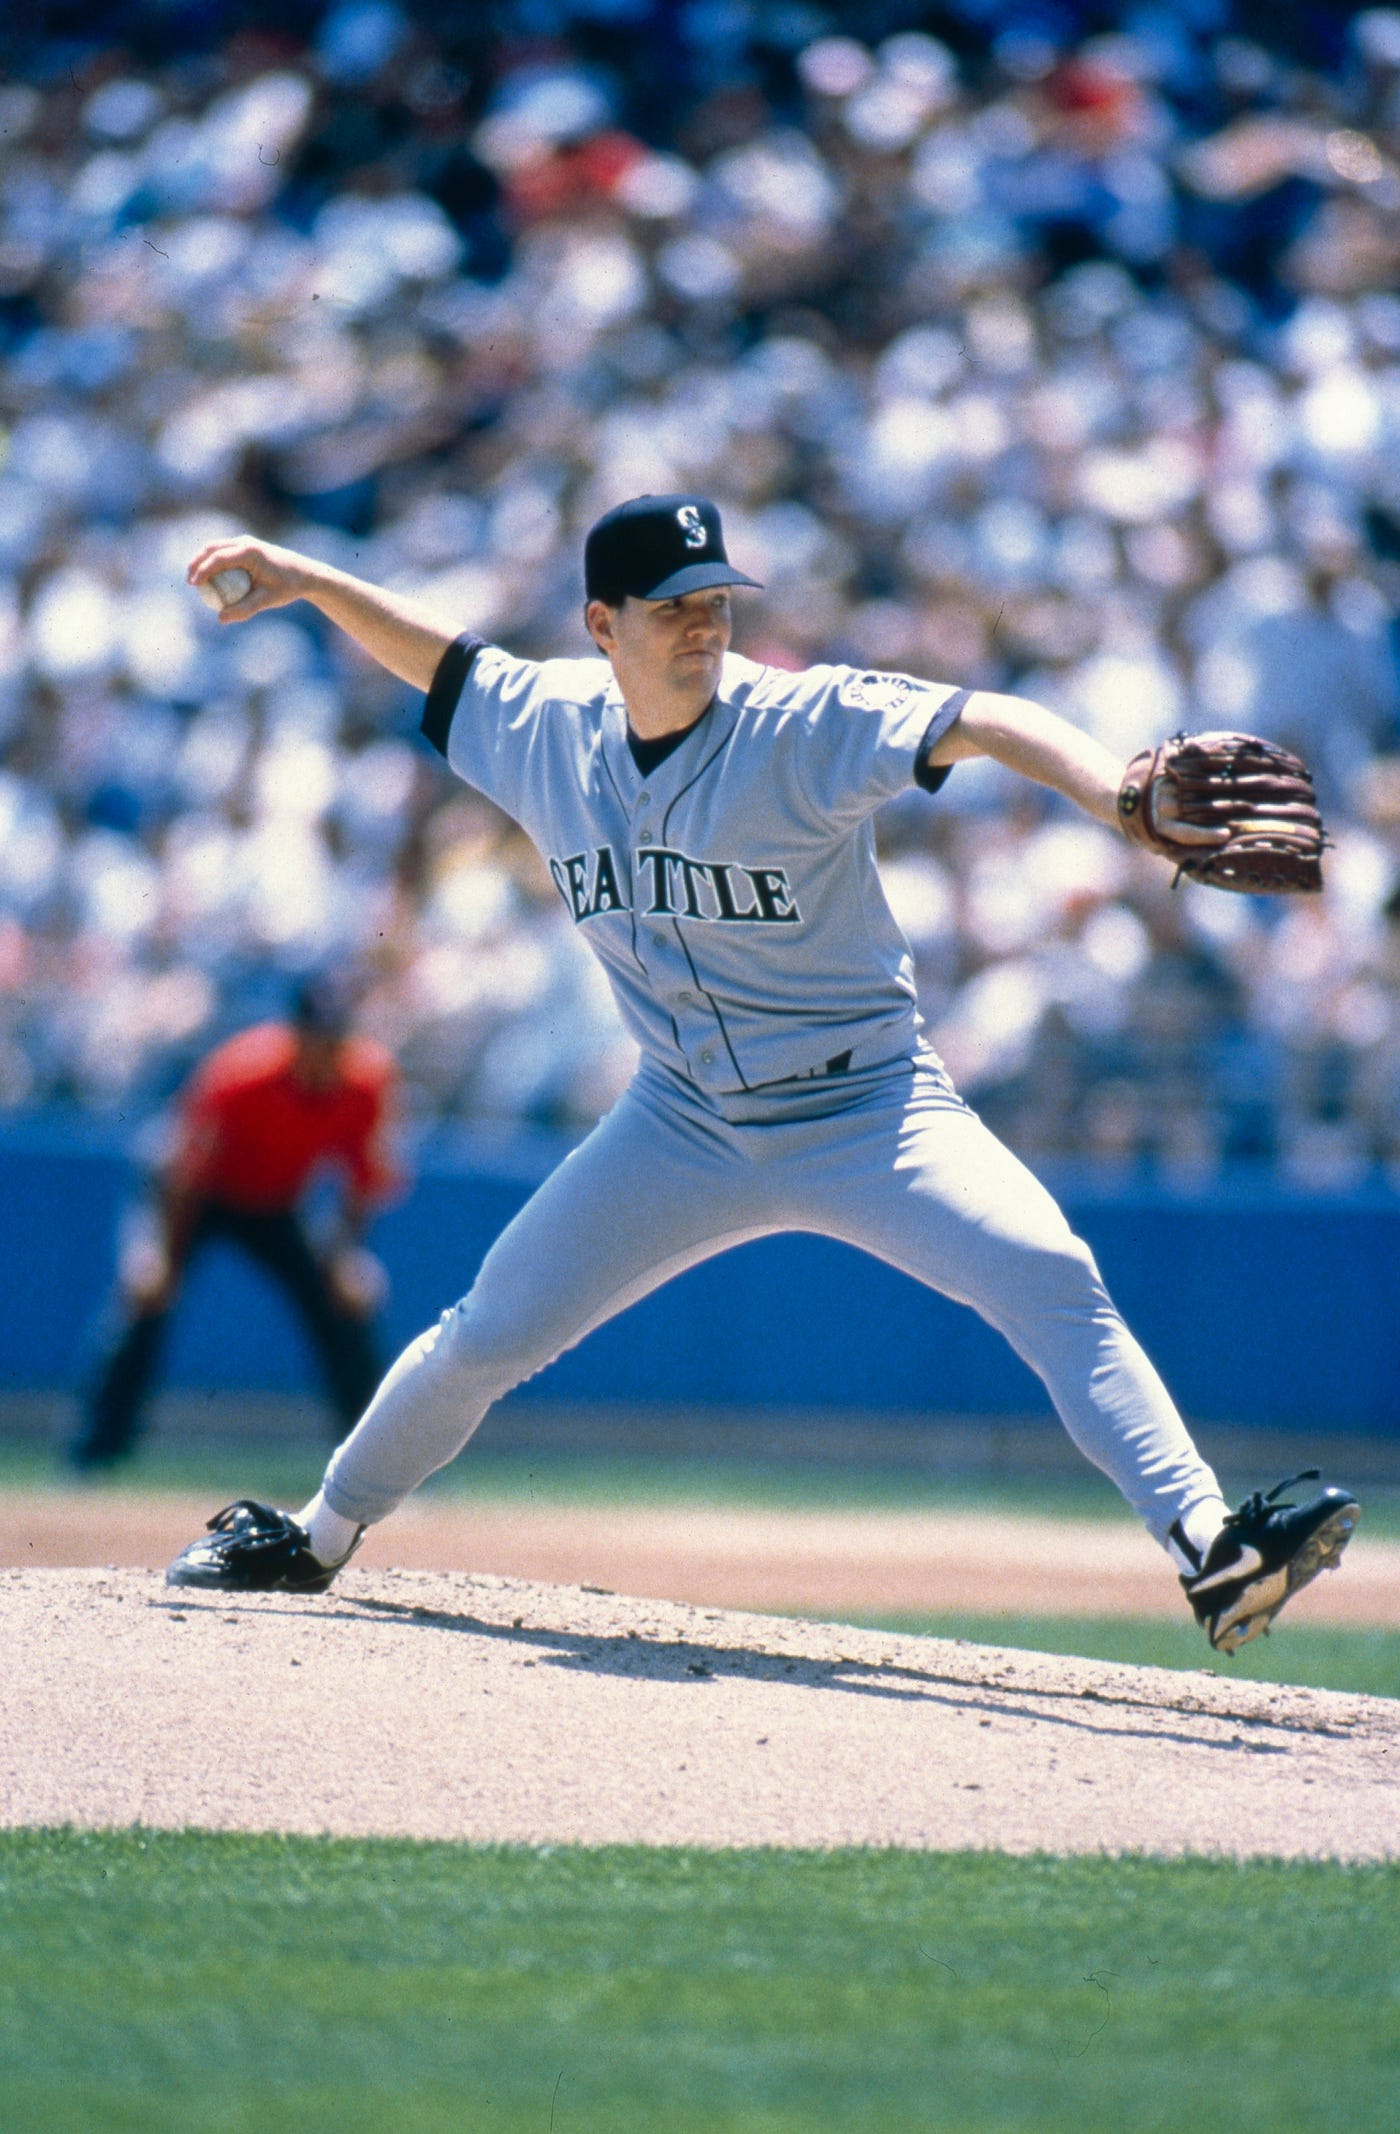 Like in 1995, Jay Buhner believes Mariners can aim higher than